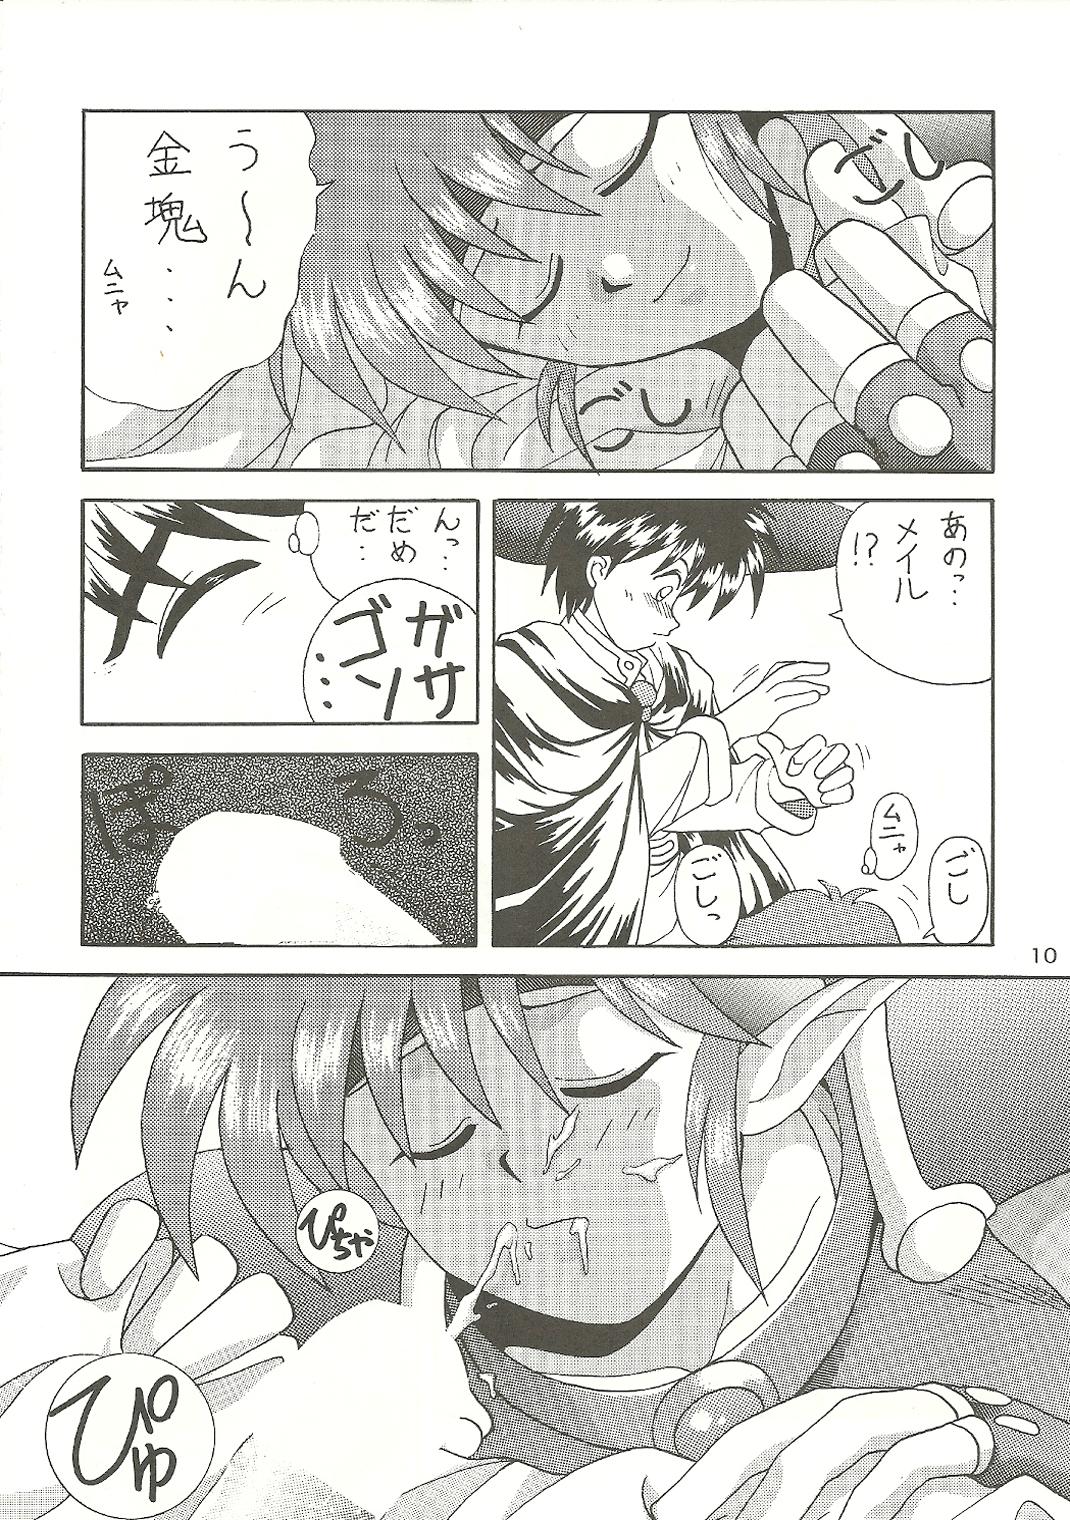 Penetration R URABON 3 - Twinbee Shining force Popful mail Amatures Gone Wild - Page 9